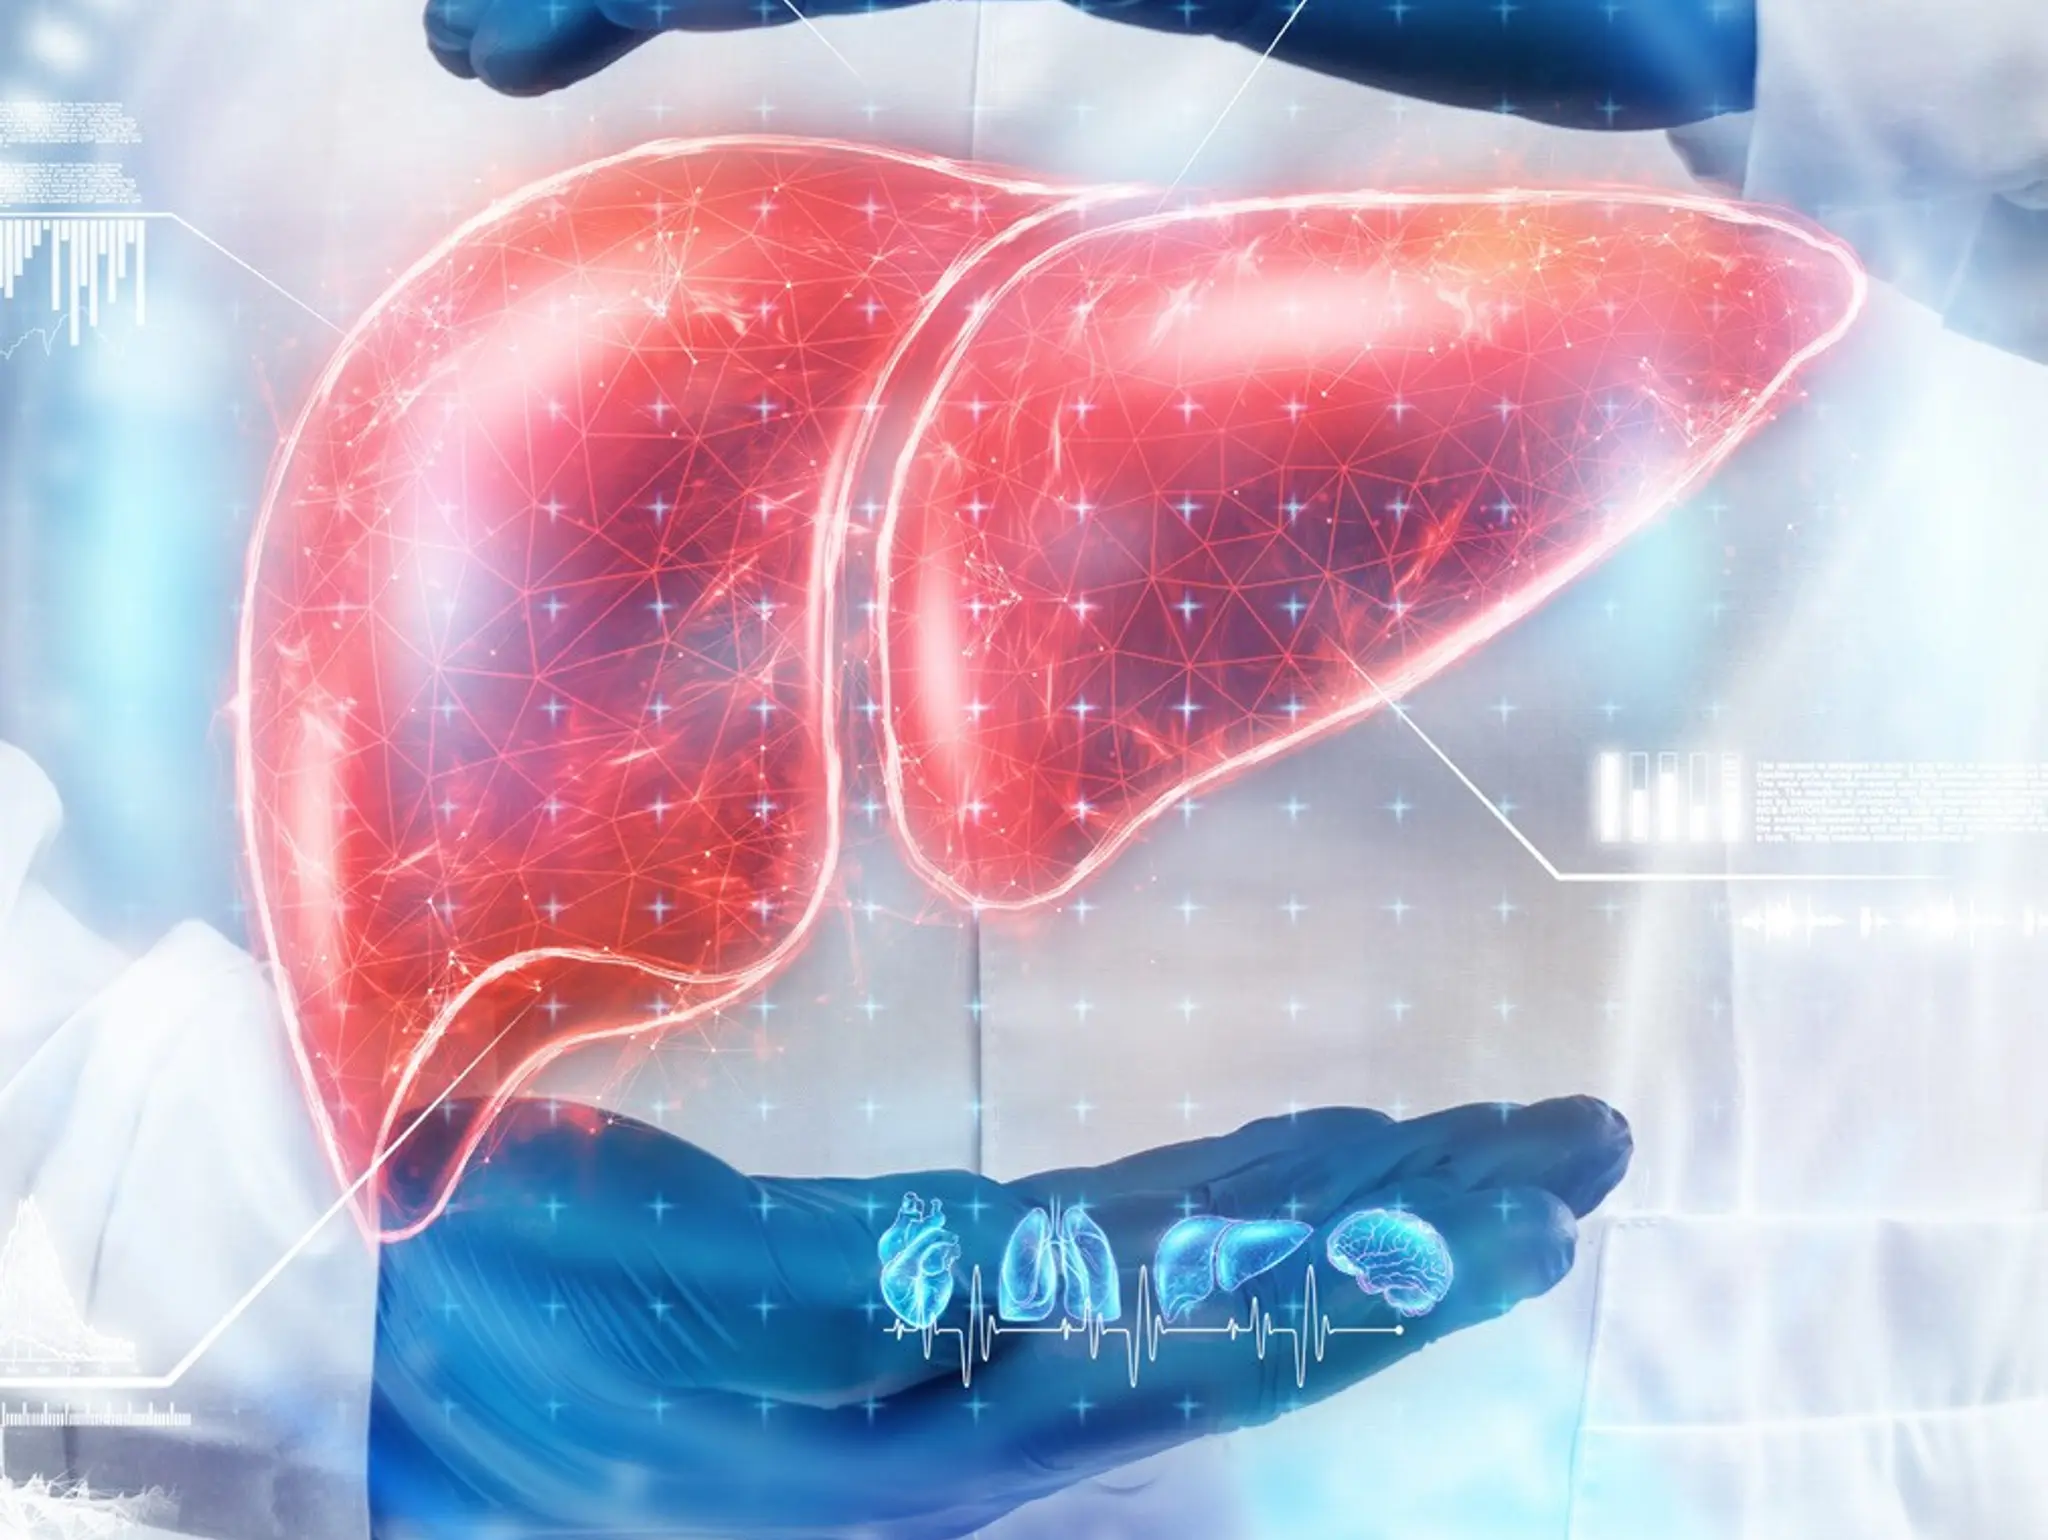 Rezdiffra approved by FDA as first treatment for liver scarring due to fatty liver disease